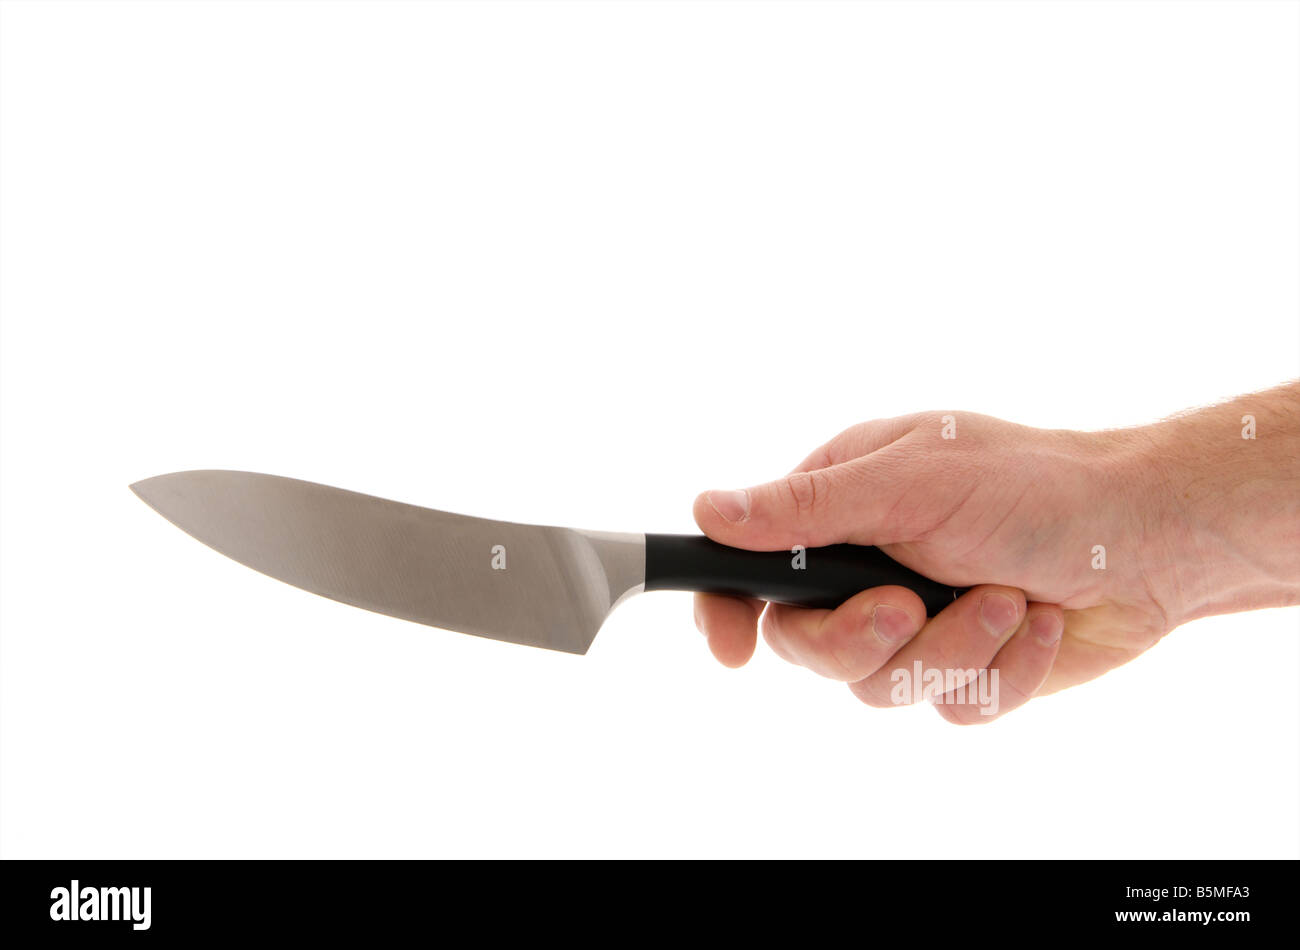 mans male right outstretched hand holding a kitchen knife against a white background Stock Photo